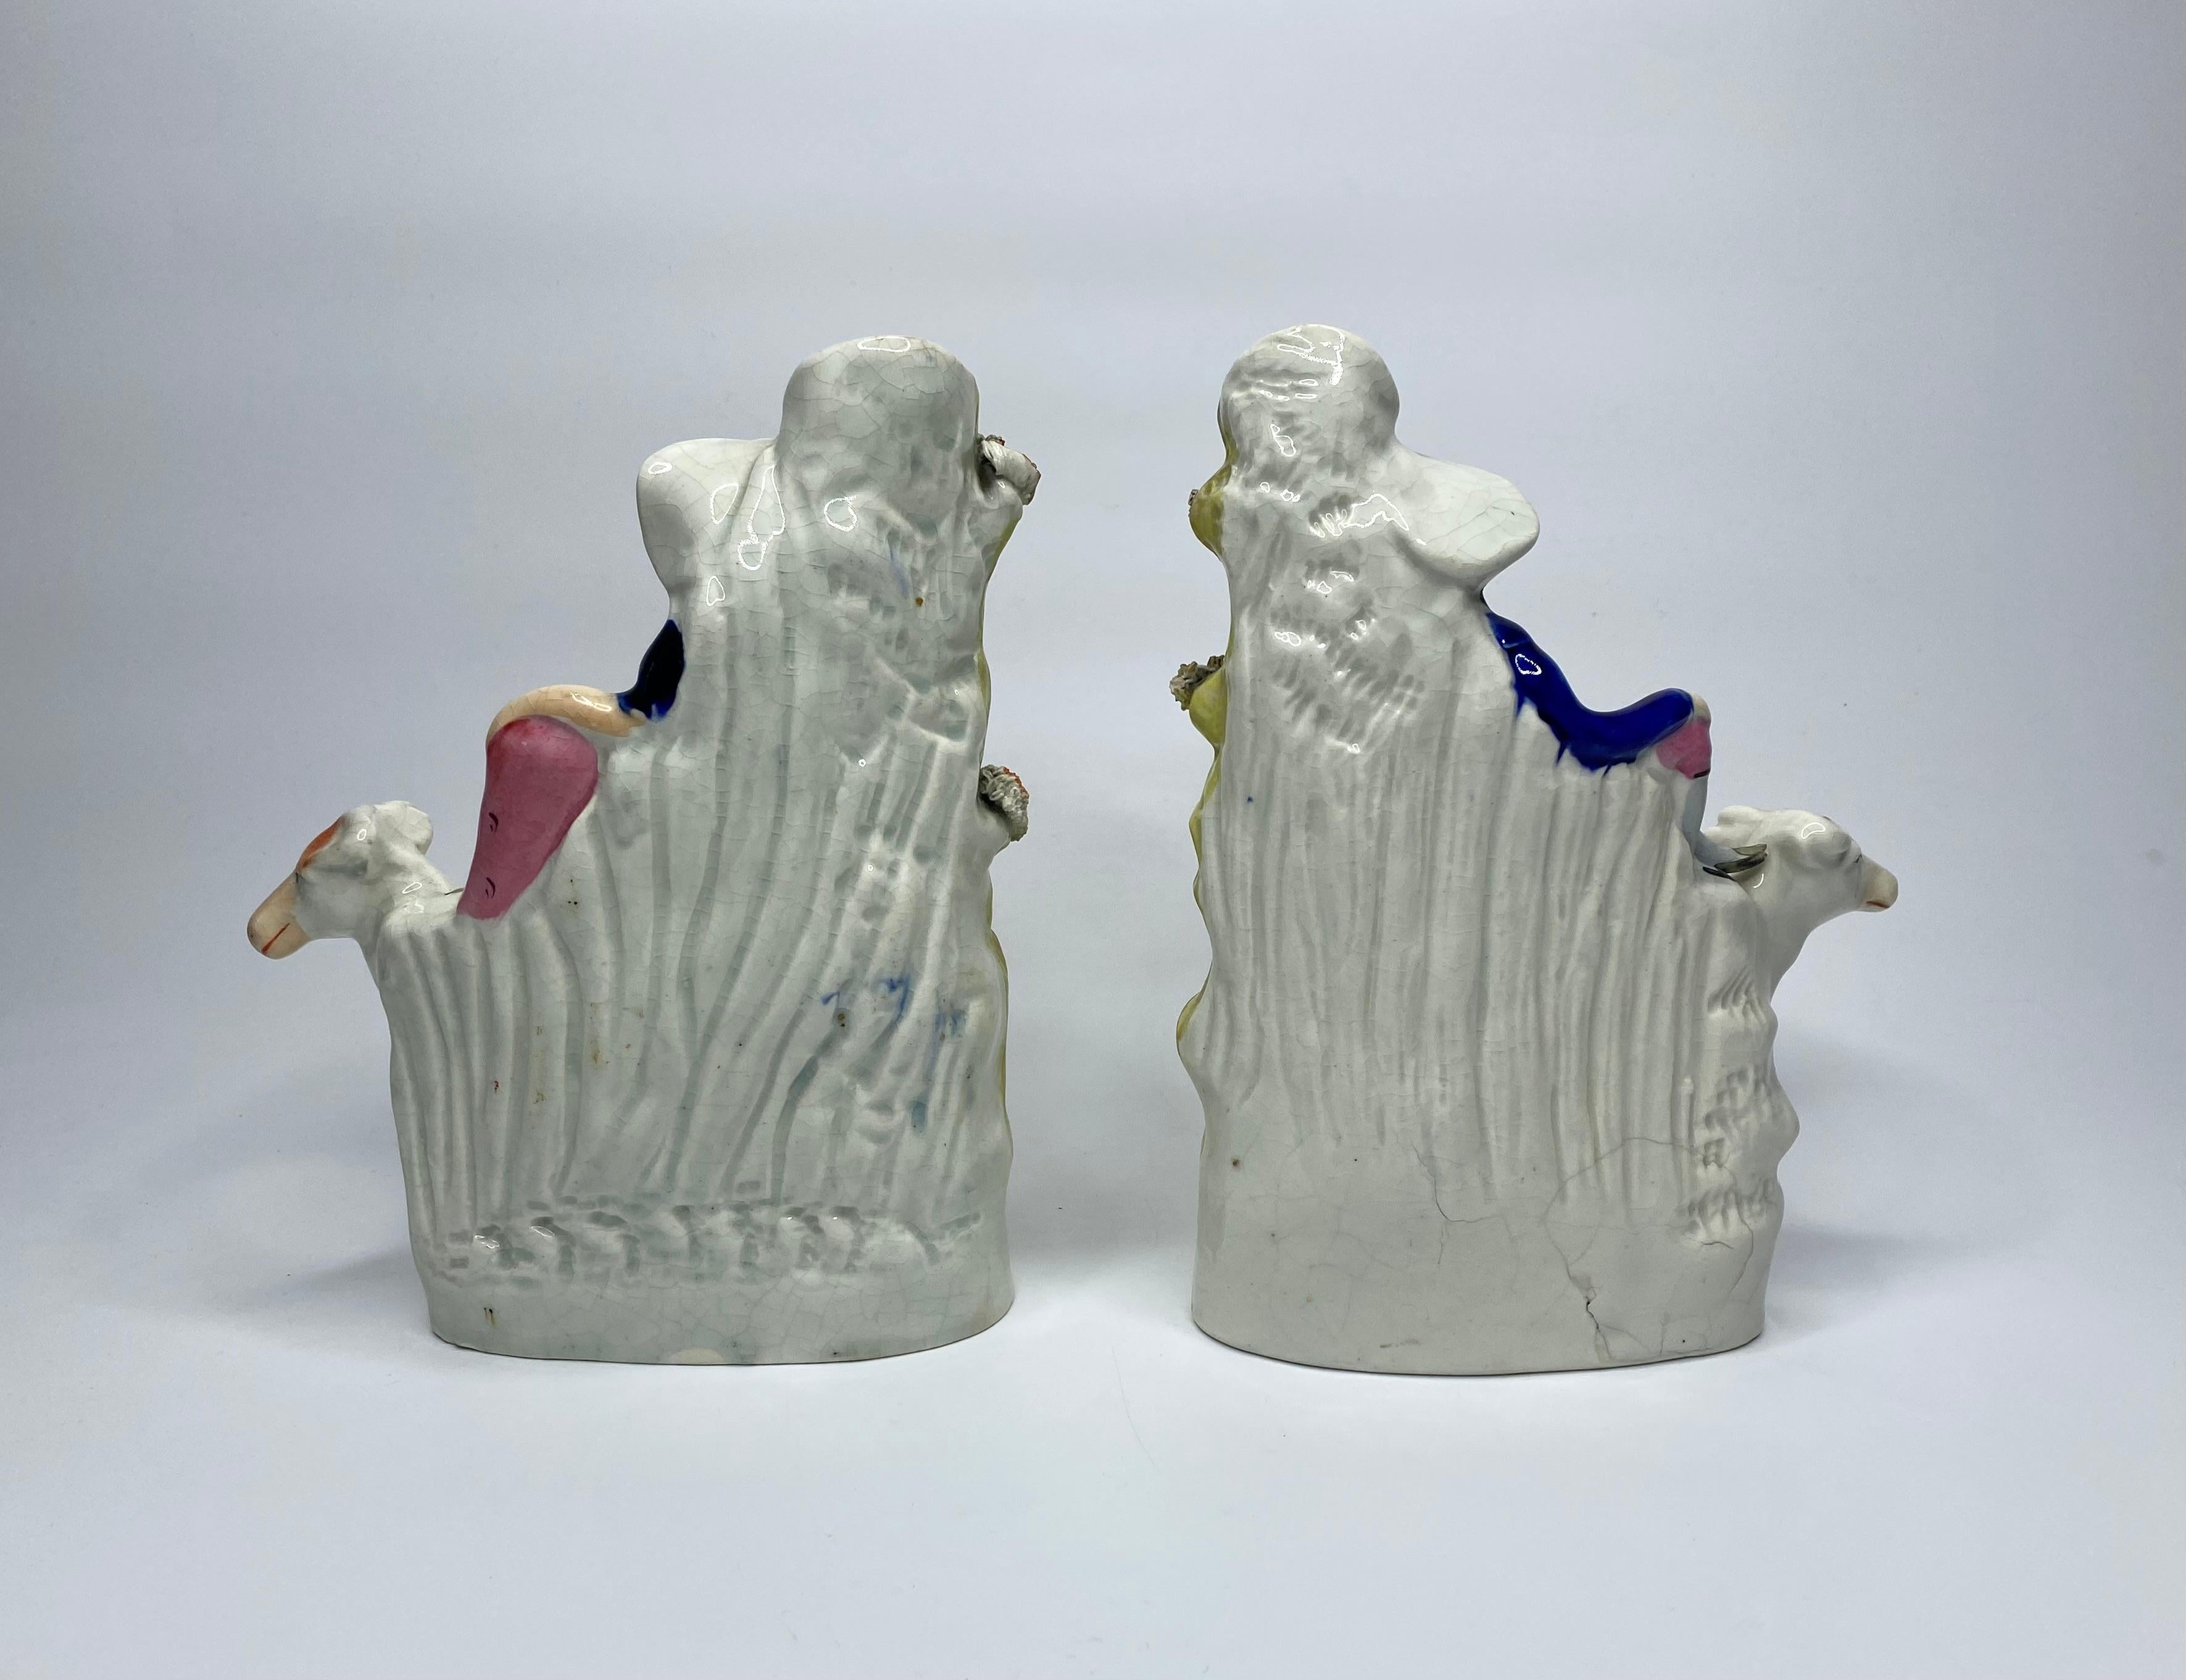 Fired Staffordshire cow spill vases, c. 1860. For Sale